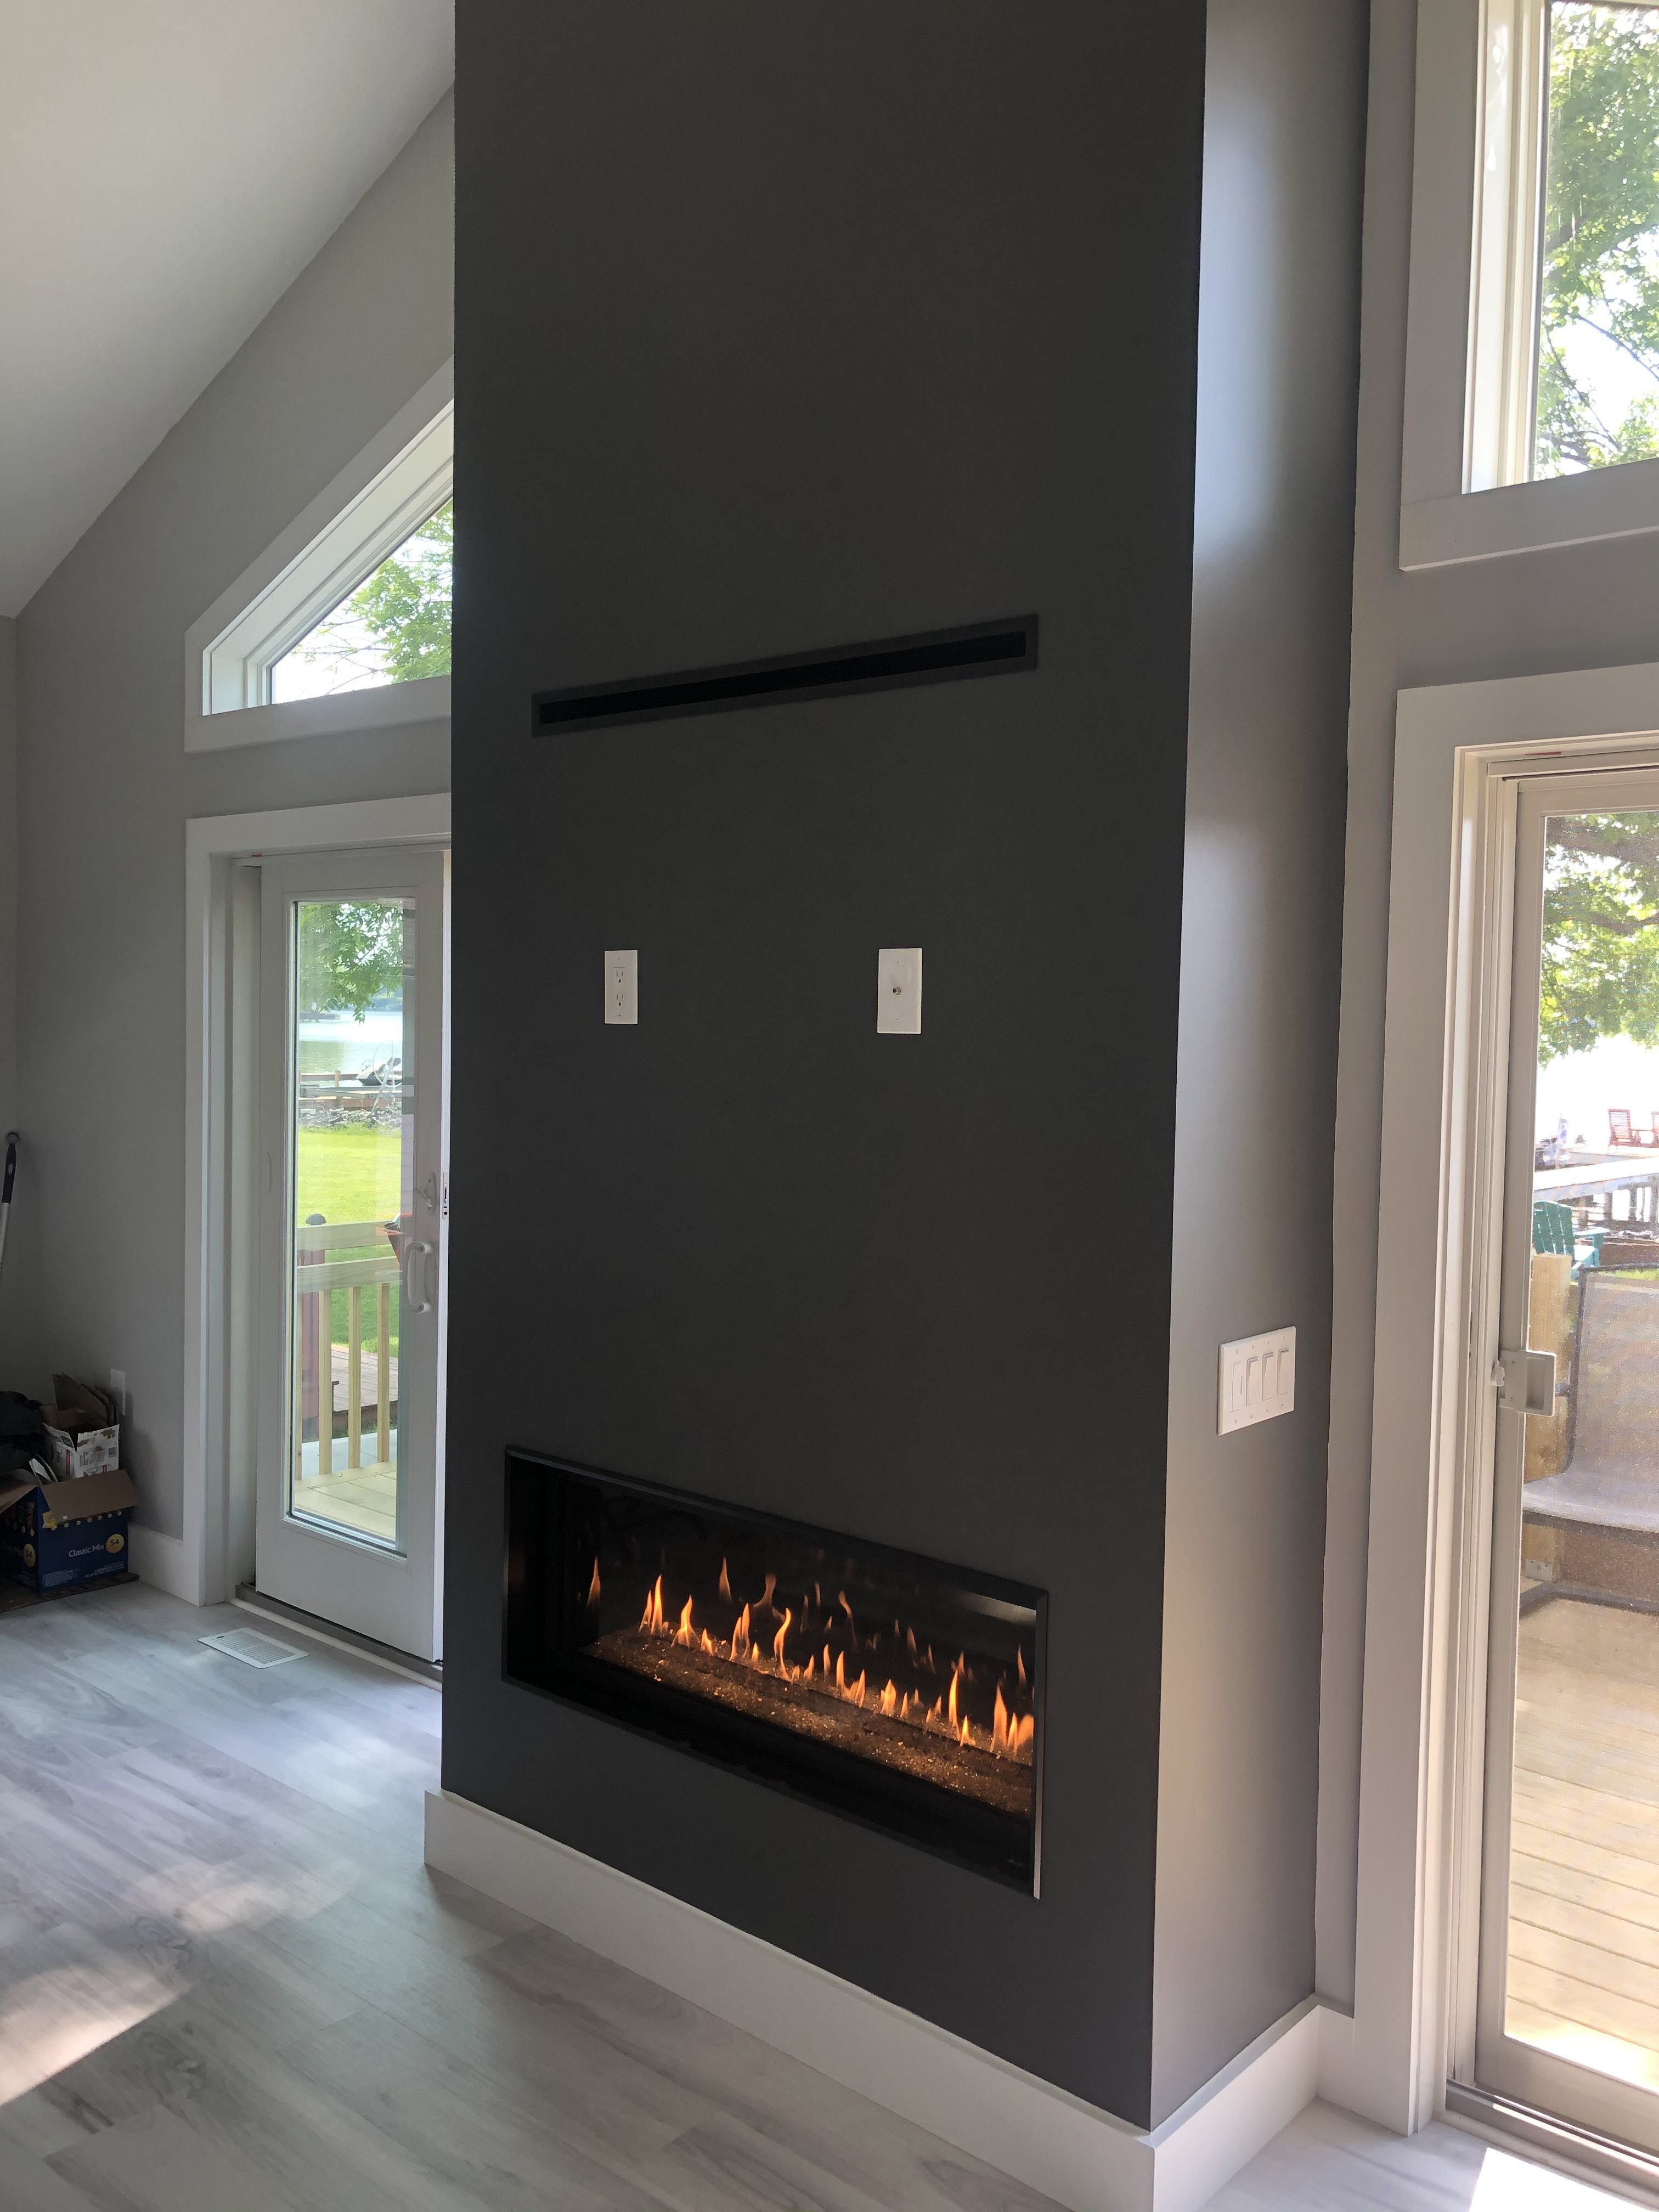 Image of a contemporary 4415HO Lineasr Gas Fireplace by Fireplace Xtordinair featuring a CoolSmart Kit and Painted Wall Finish.